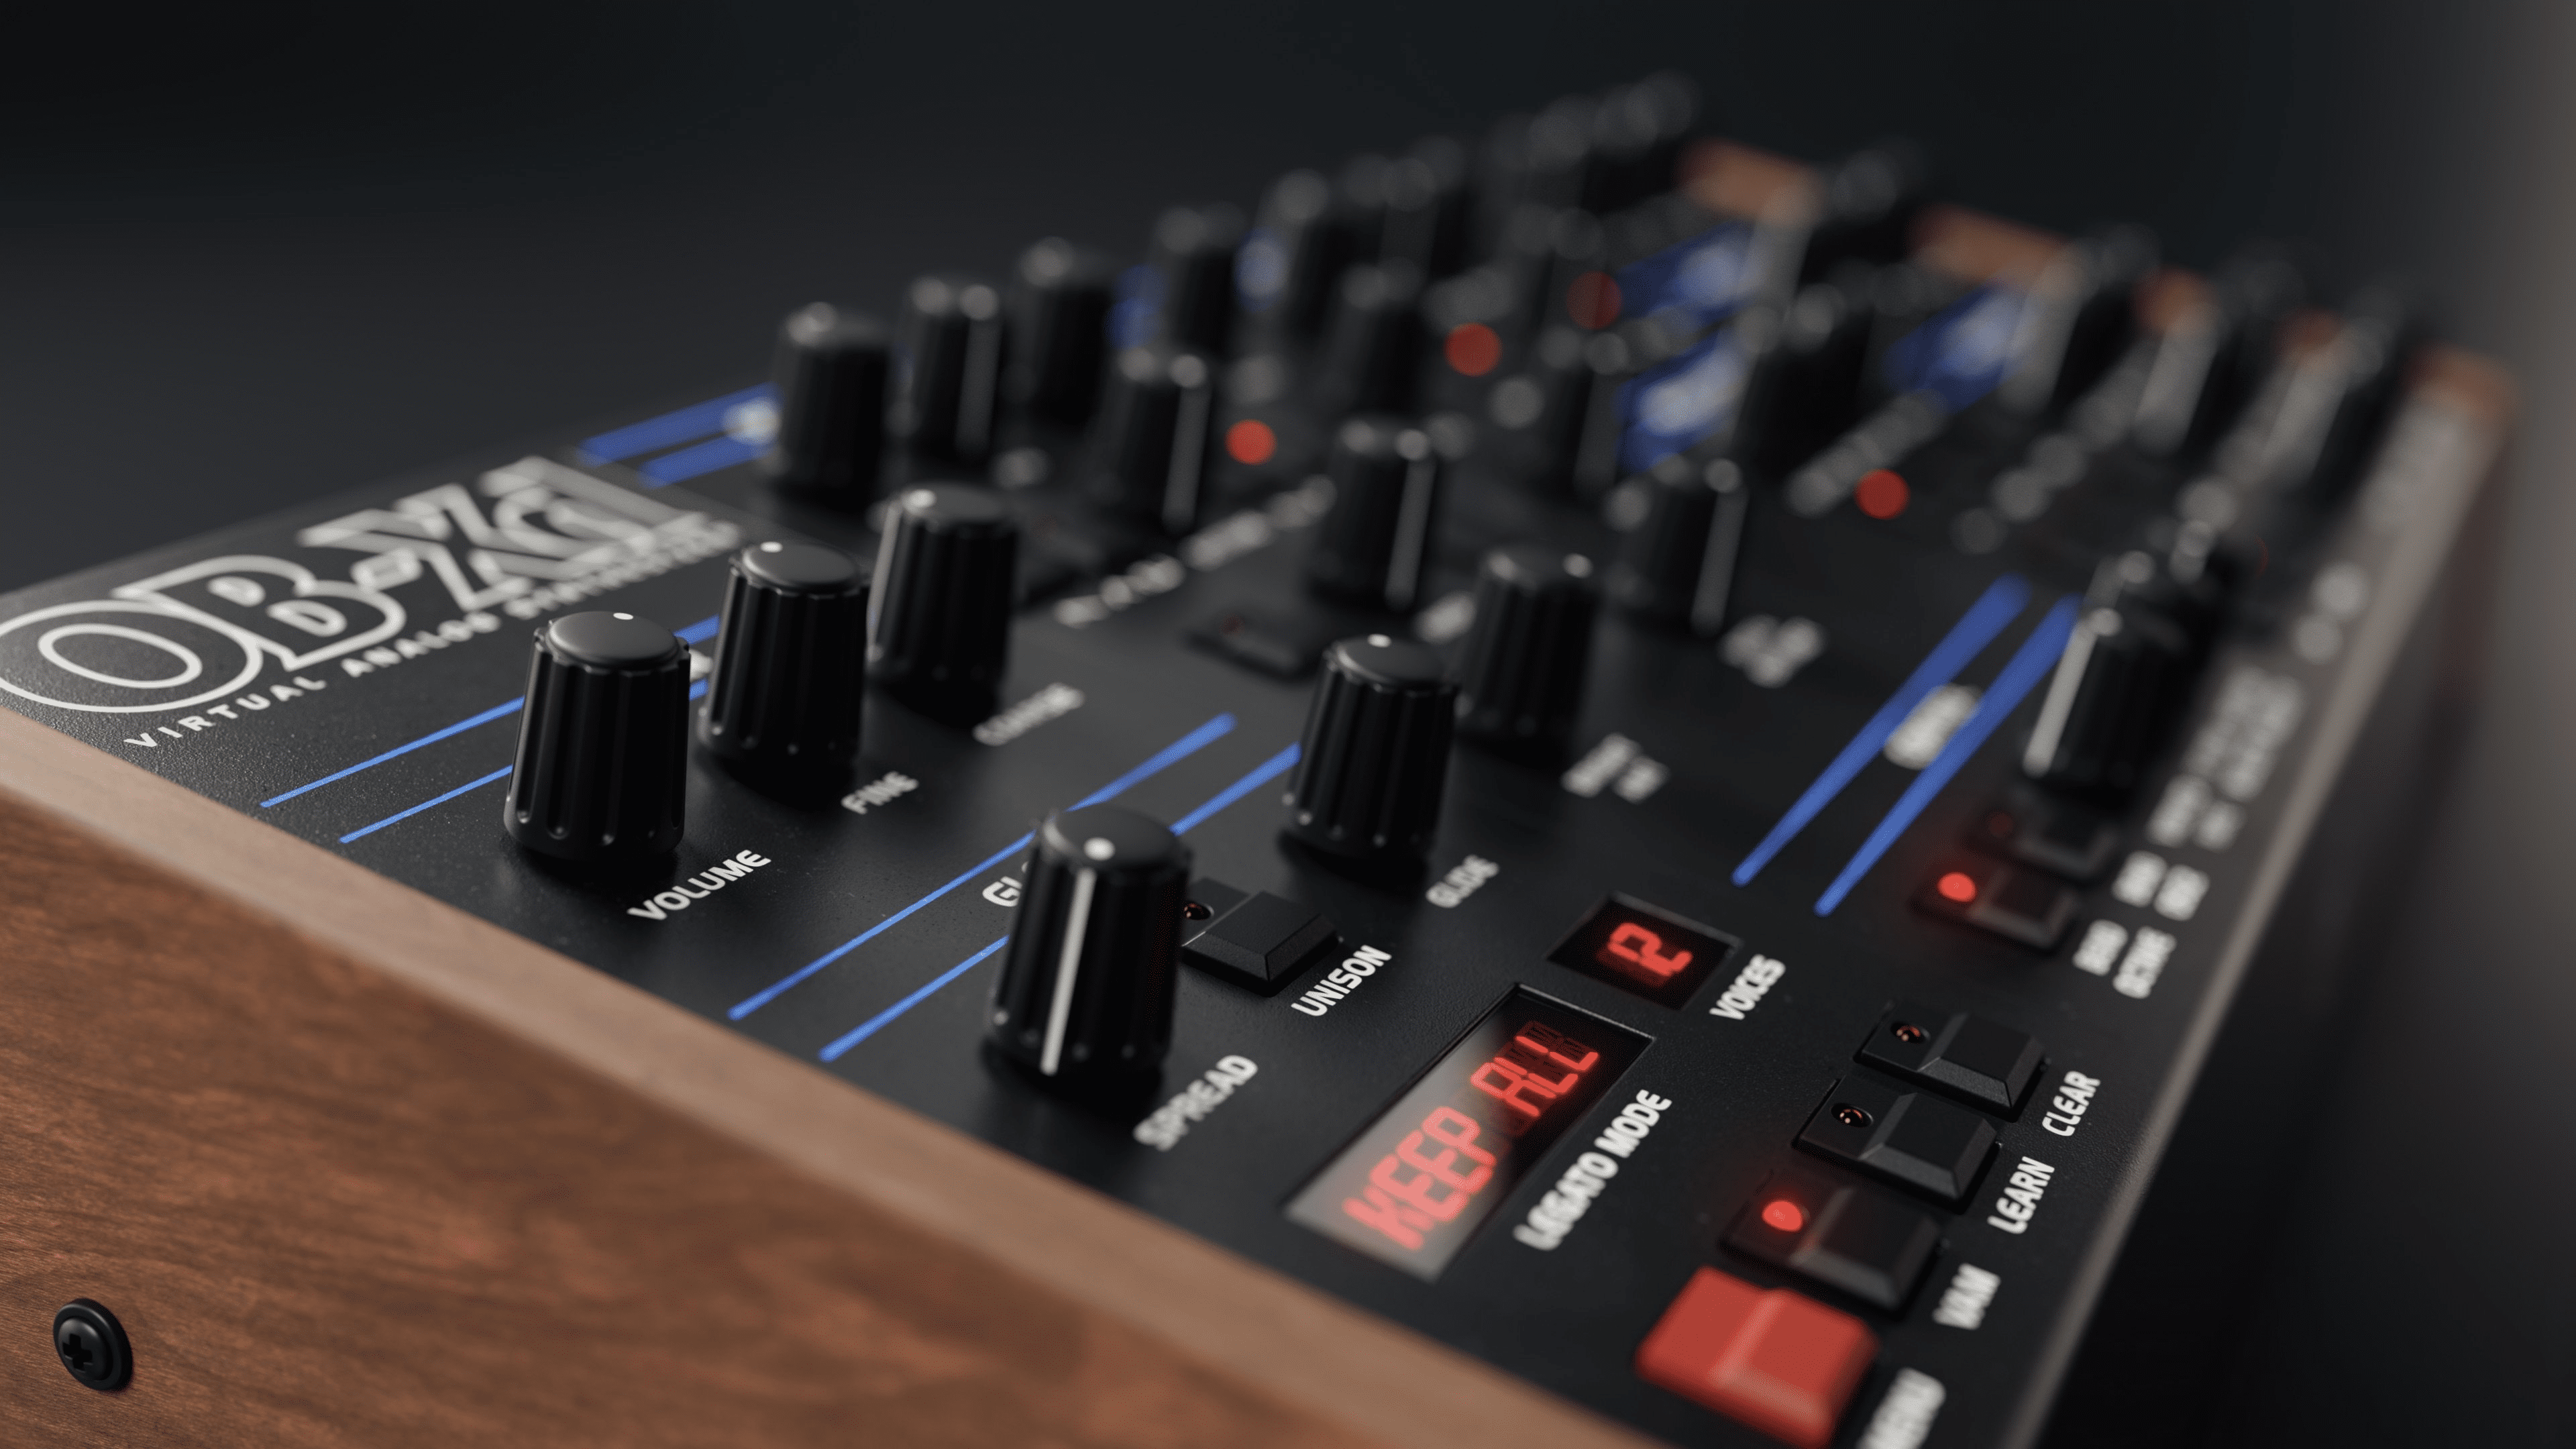 discoDSP’s Released OB-Xd Oberheim Based Synth 2.0